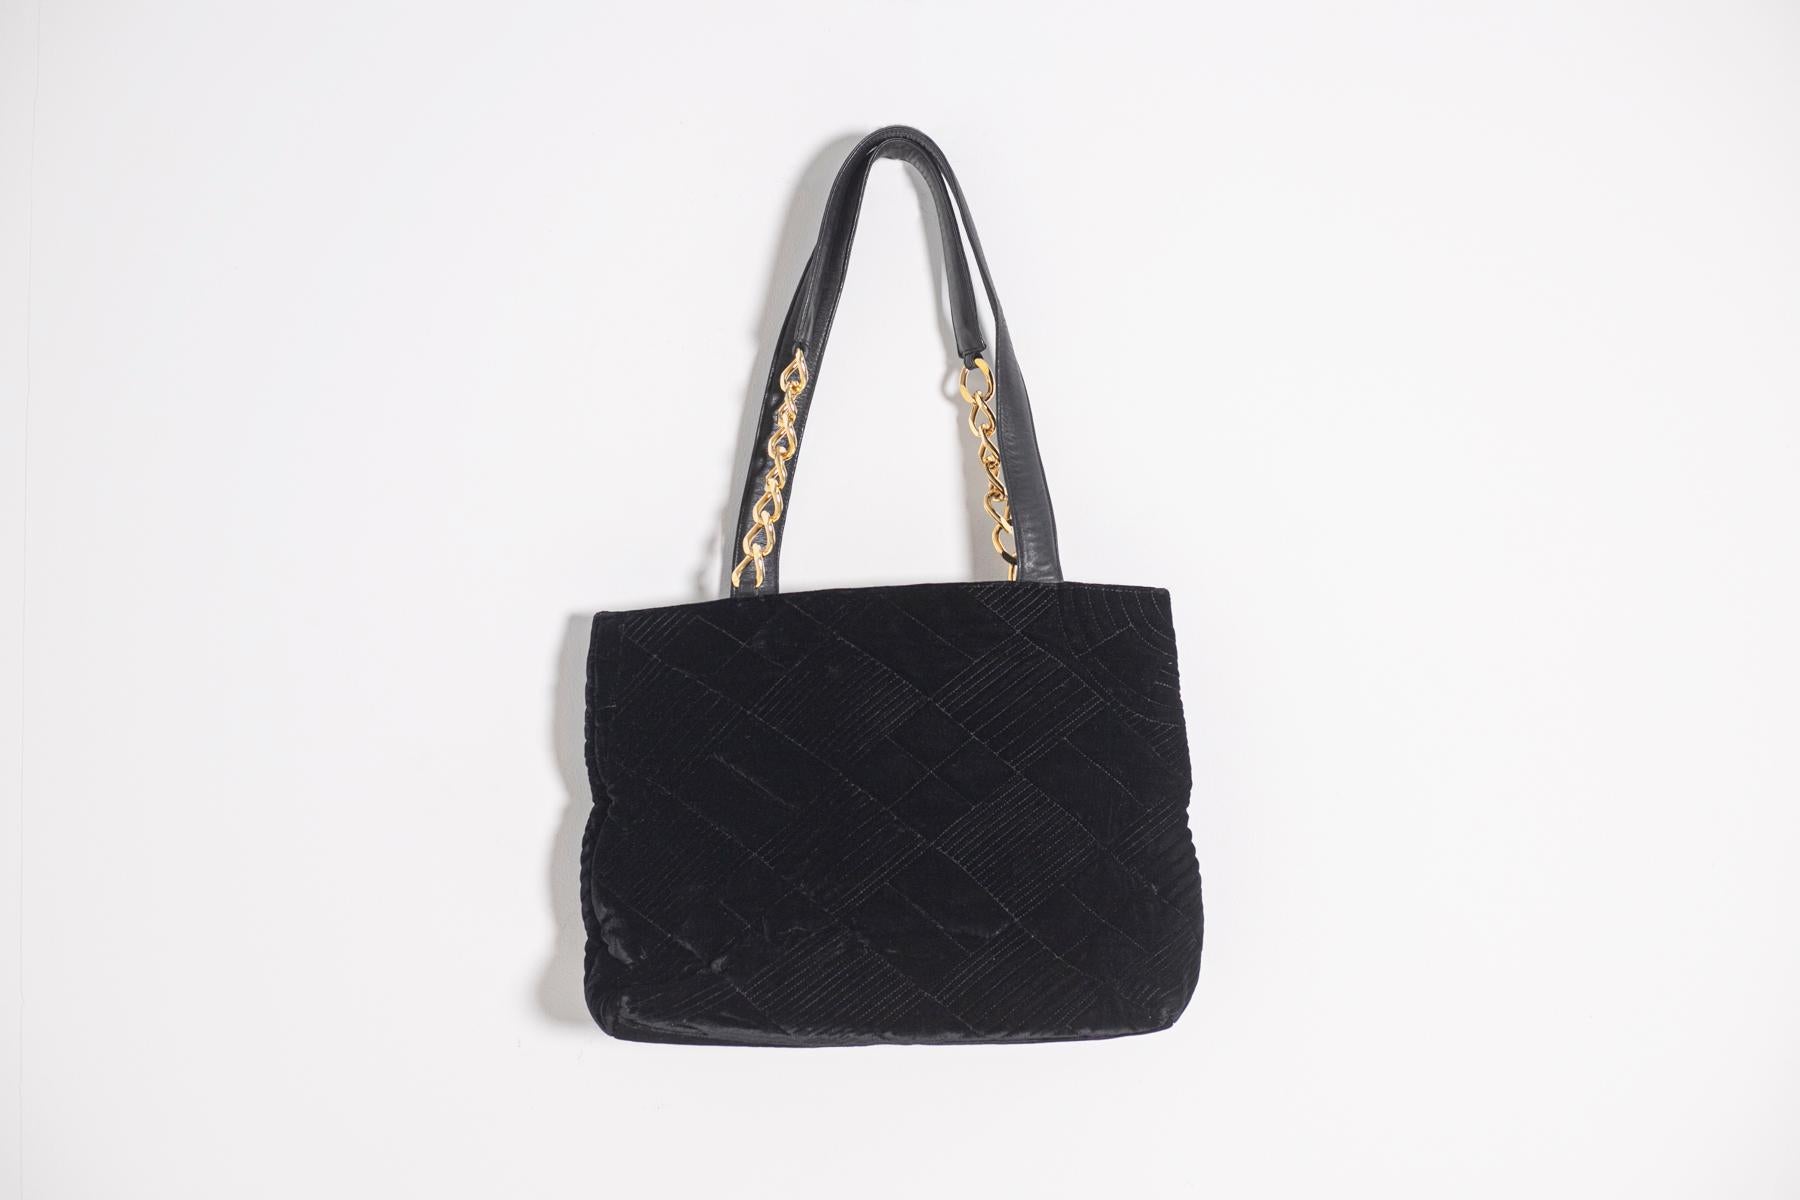 Beautiful black velvet tote bag signed Gianni Versace Couture 1990s.
The outside of the bag is made of black velvet worked, two long and particular handles in very soft black leather that are attached to the bag by a golden metal ringed chain. It is